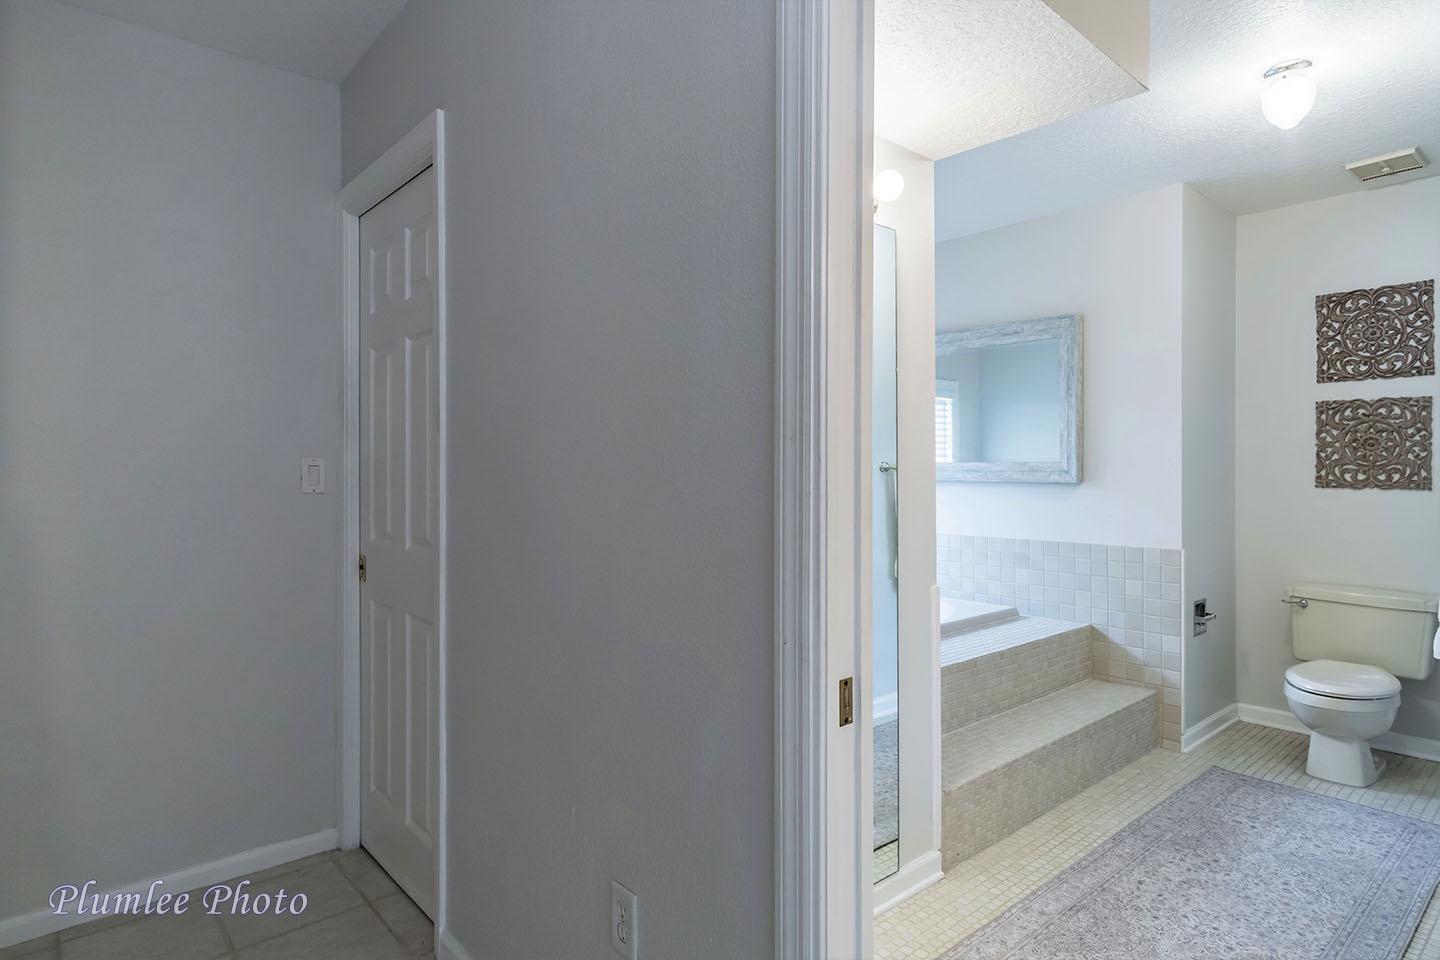 The entryway to a large family bathroom.